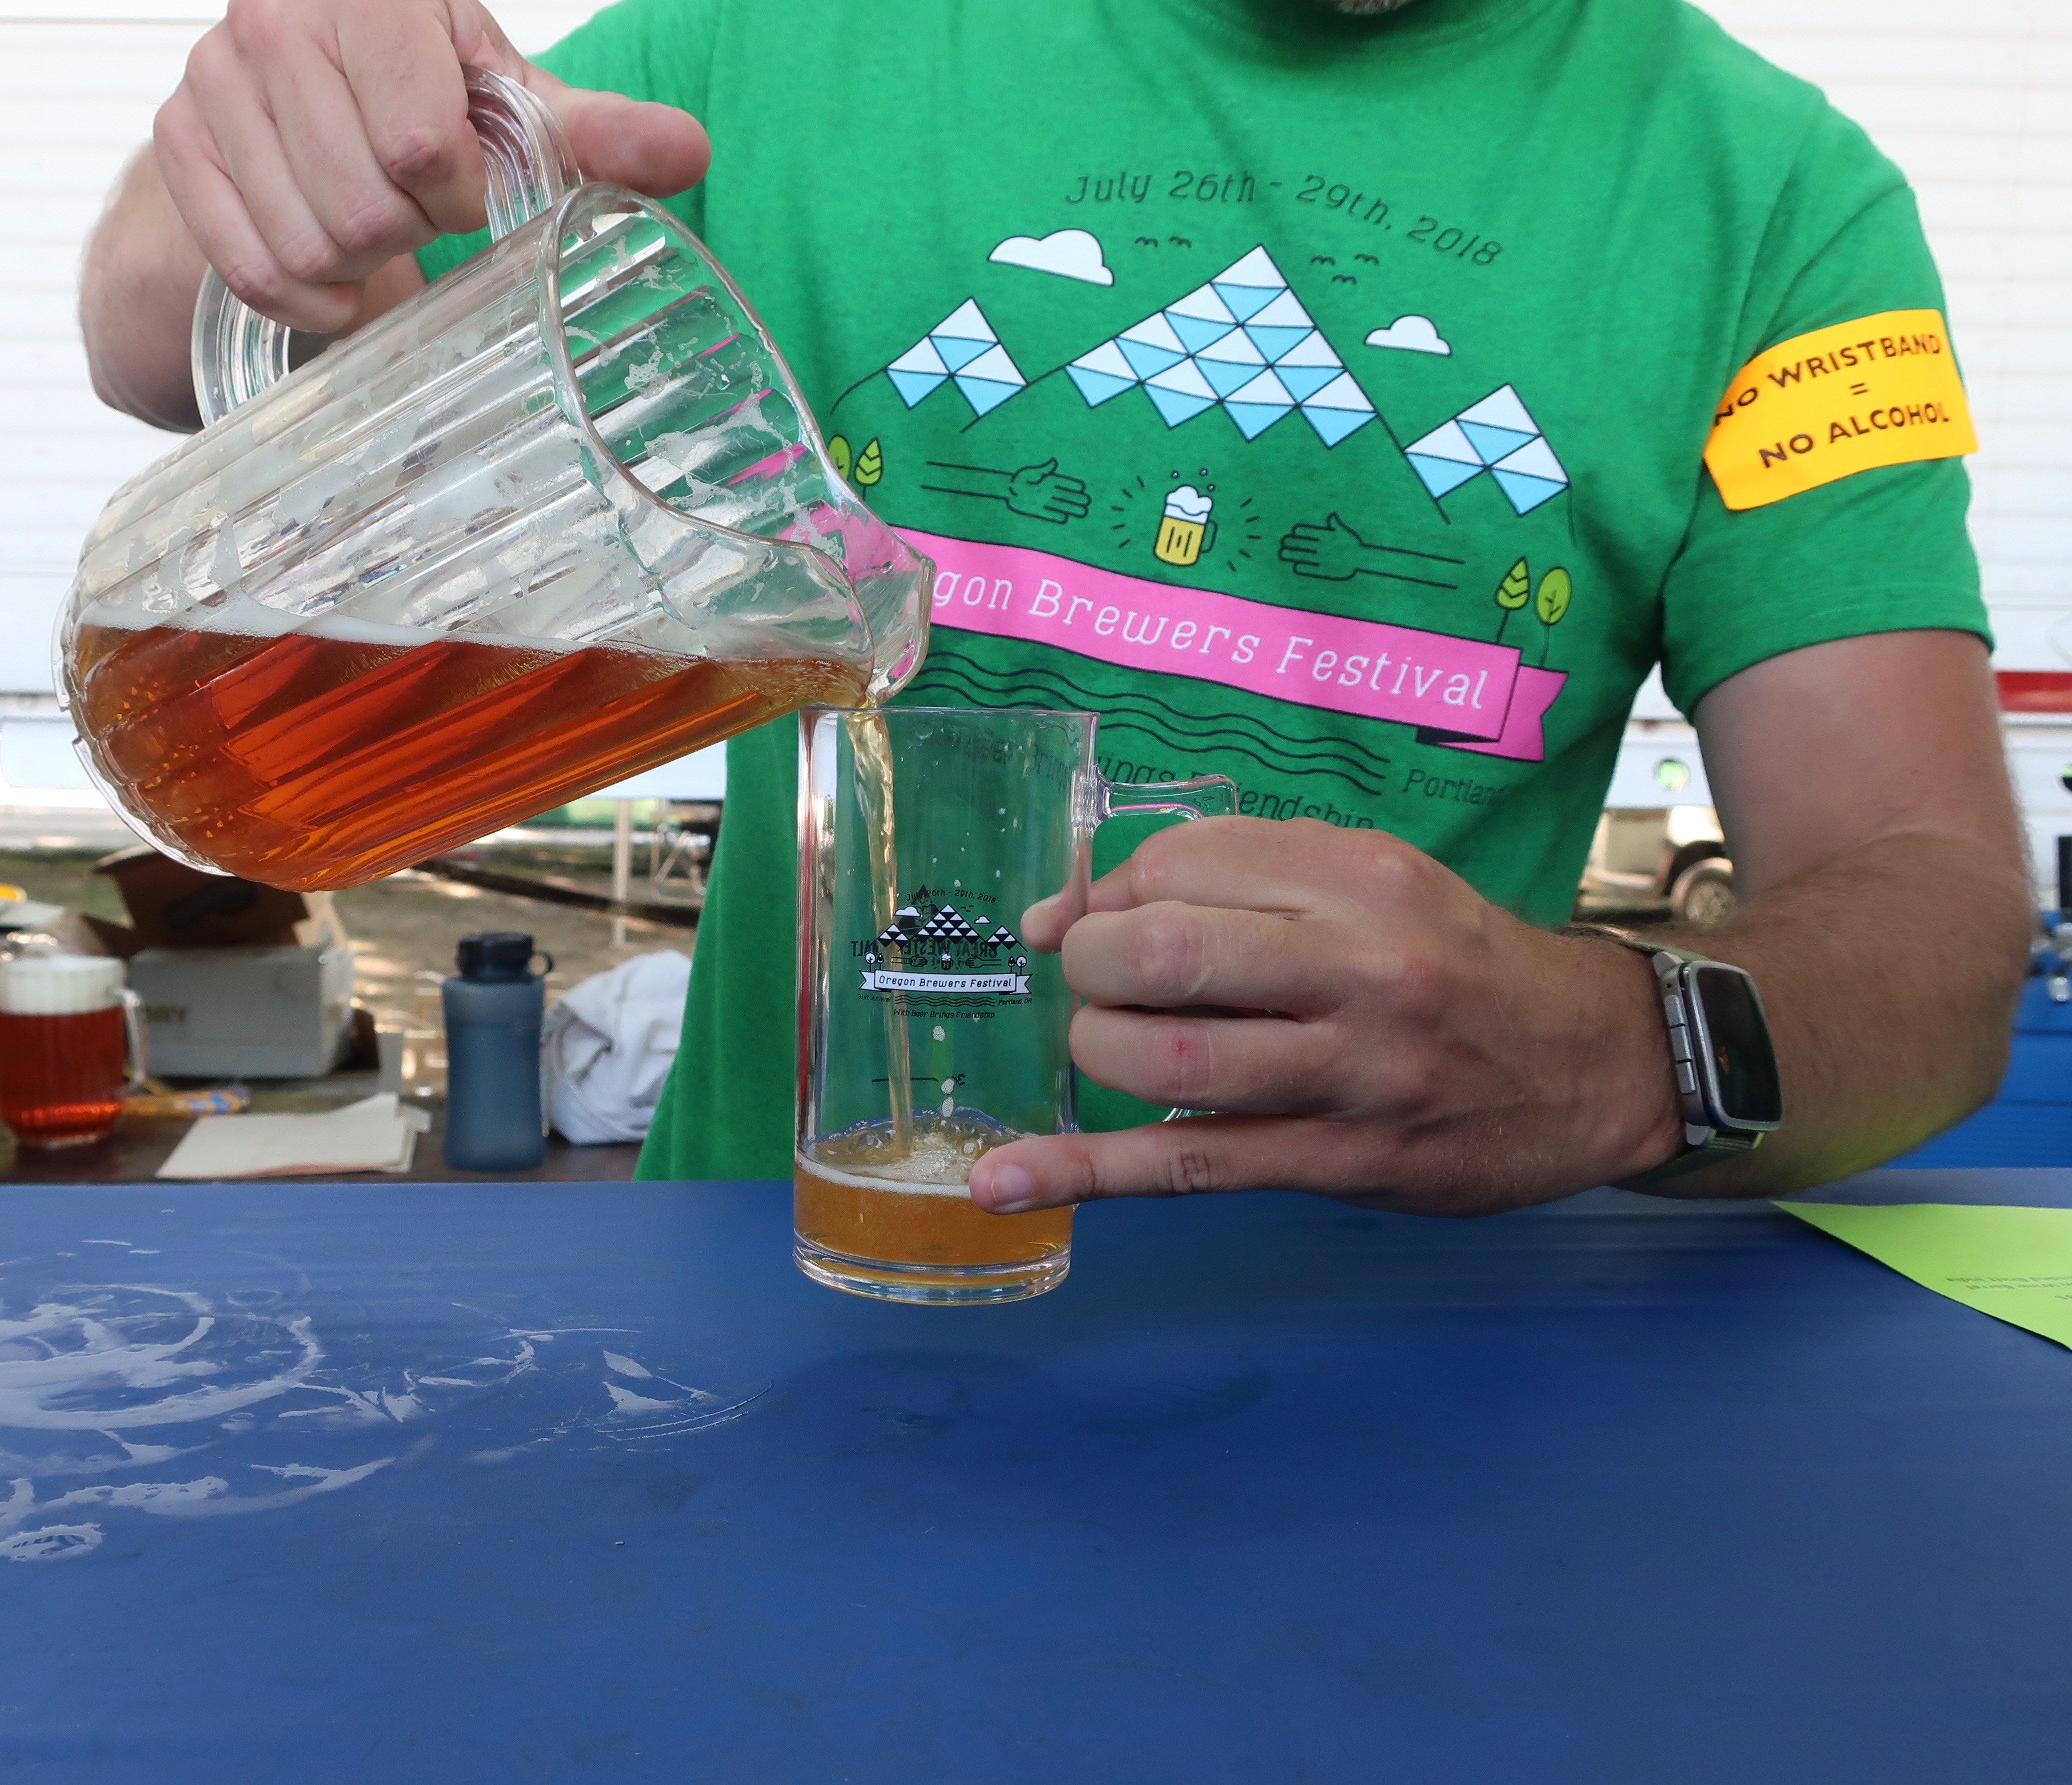 One of the 80 beers being poured at the 2018 Oregon Brewers Festival.